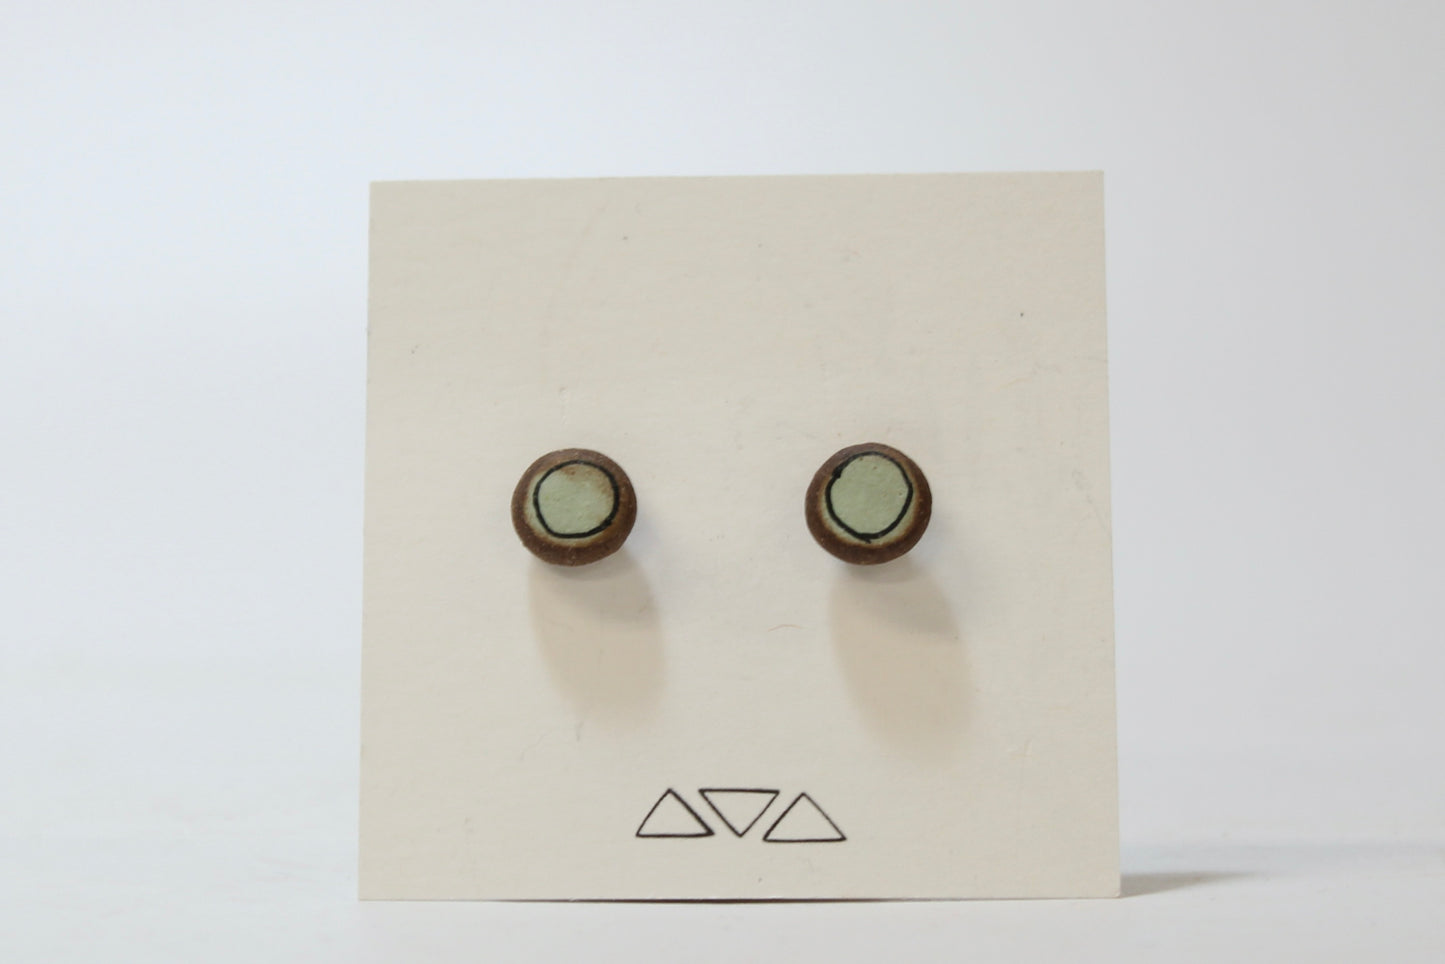 215. Light Teal Dot Stud Earrings. Stainless steel stud with stabilizer backs. 3/8"